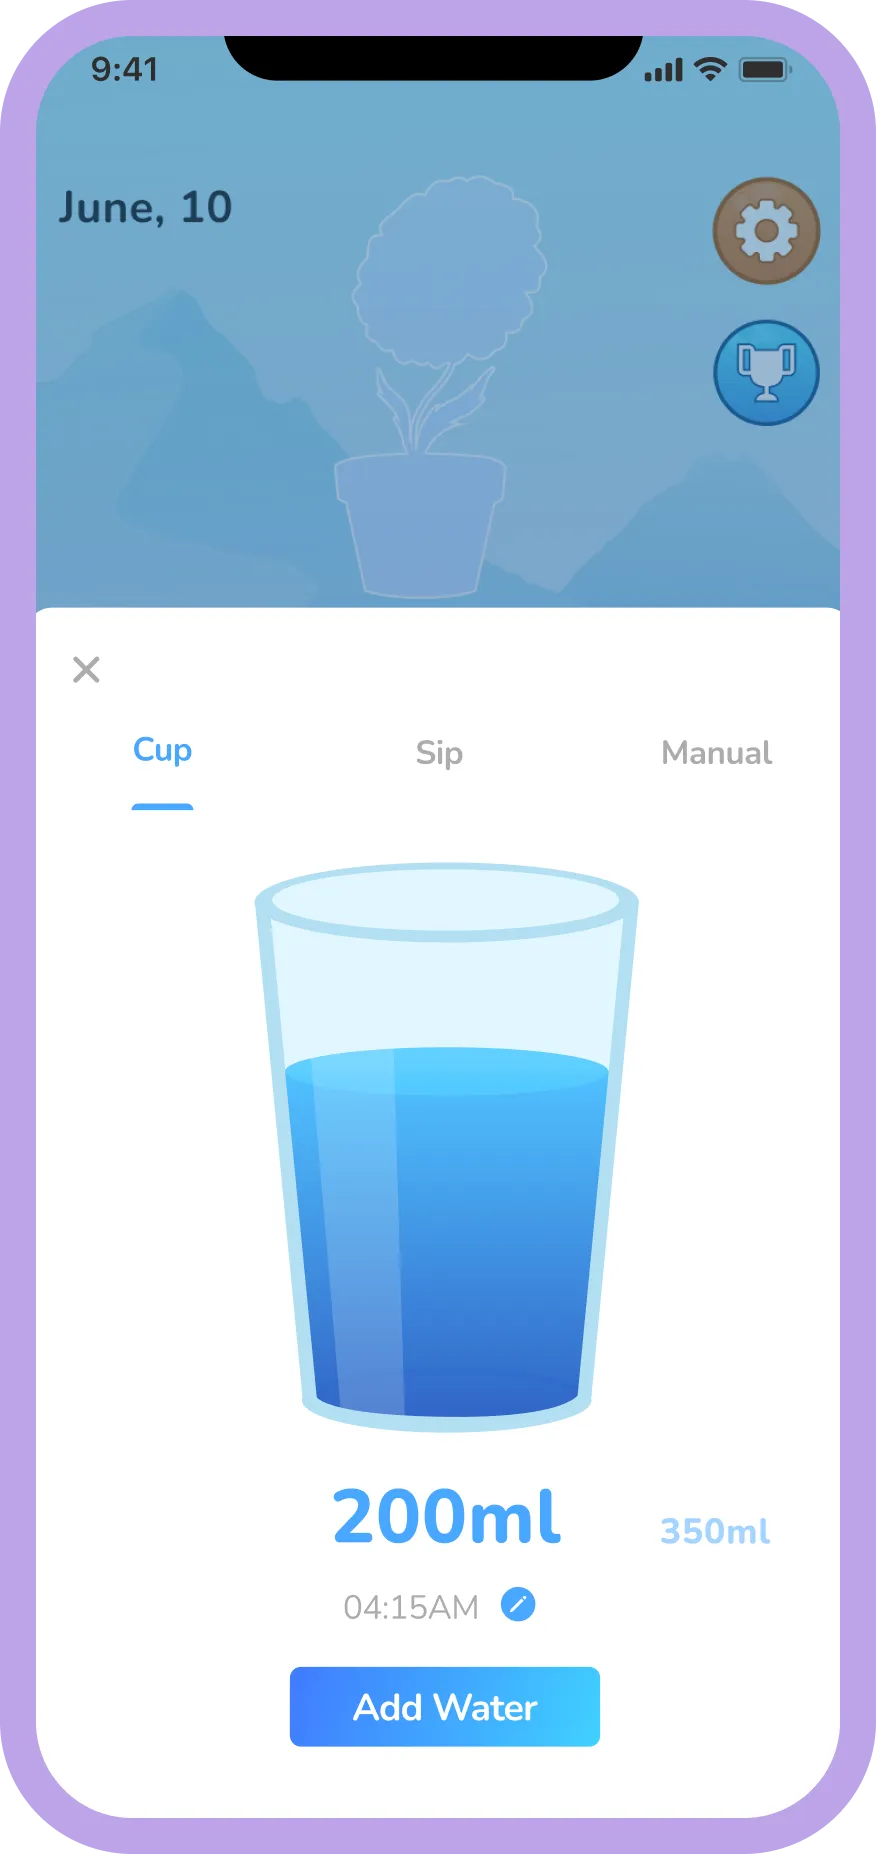 Add water with smartphone